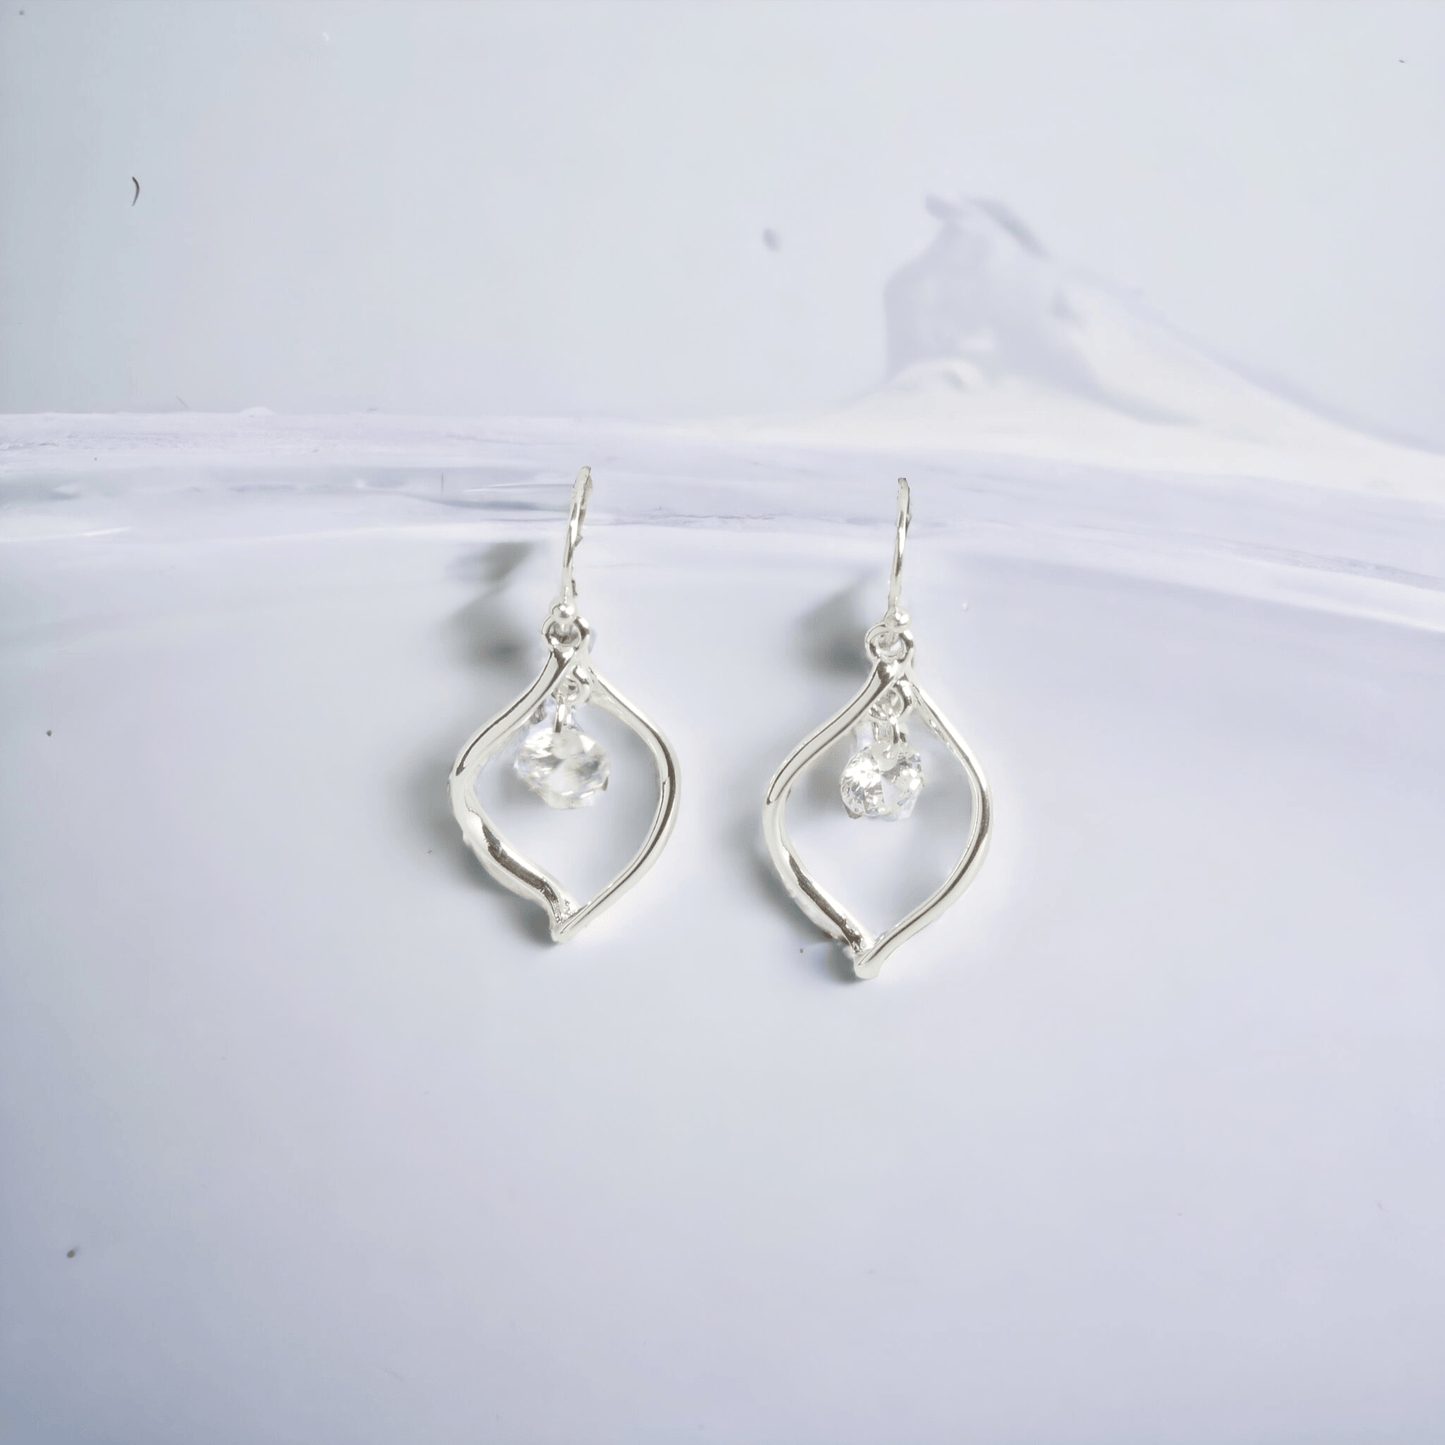 Tear Drop Earrings with Floating Crystal - J & S Expressions